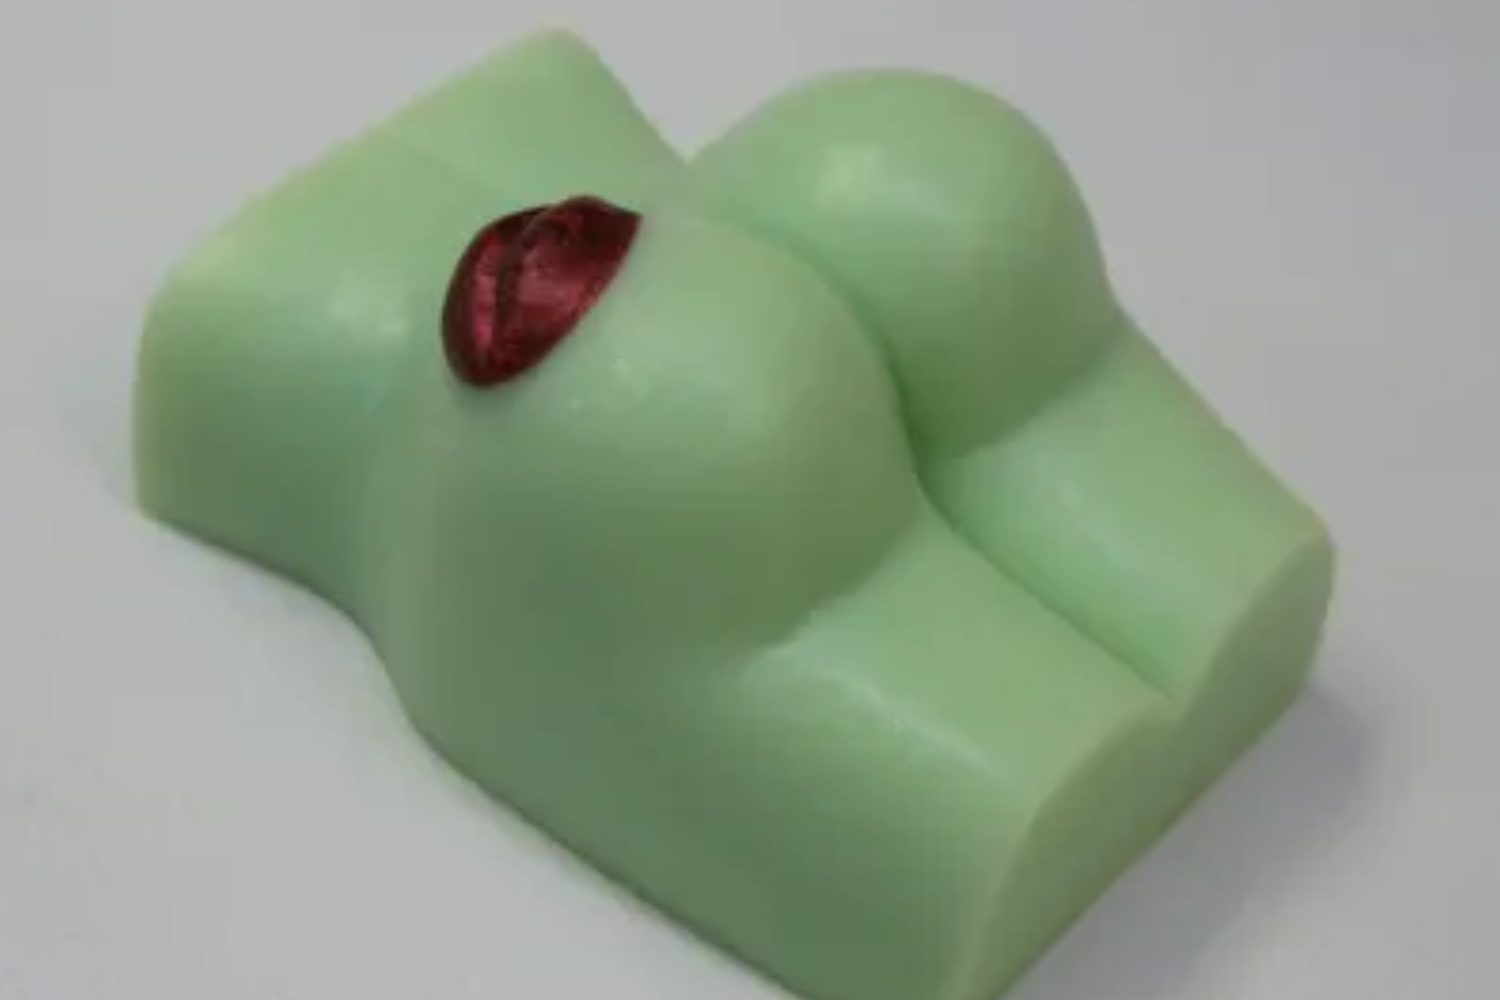 A green soap shaped like a woman 's boobs.